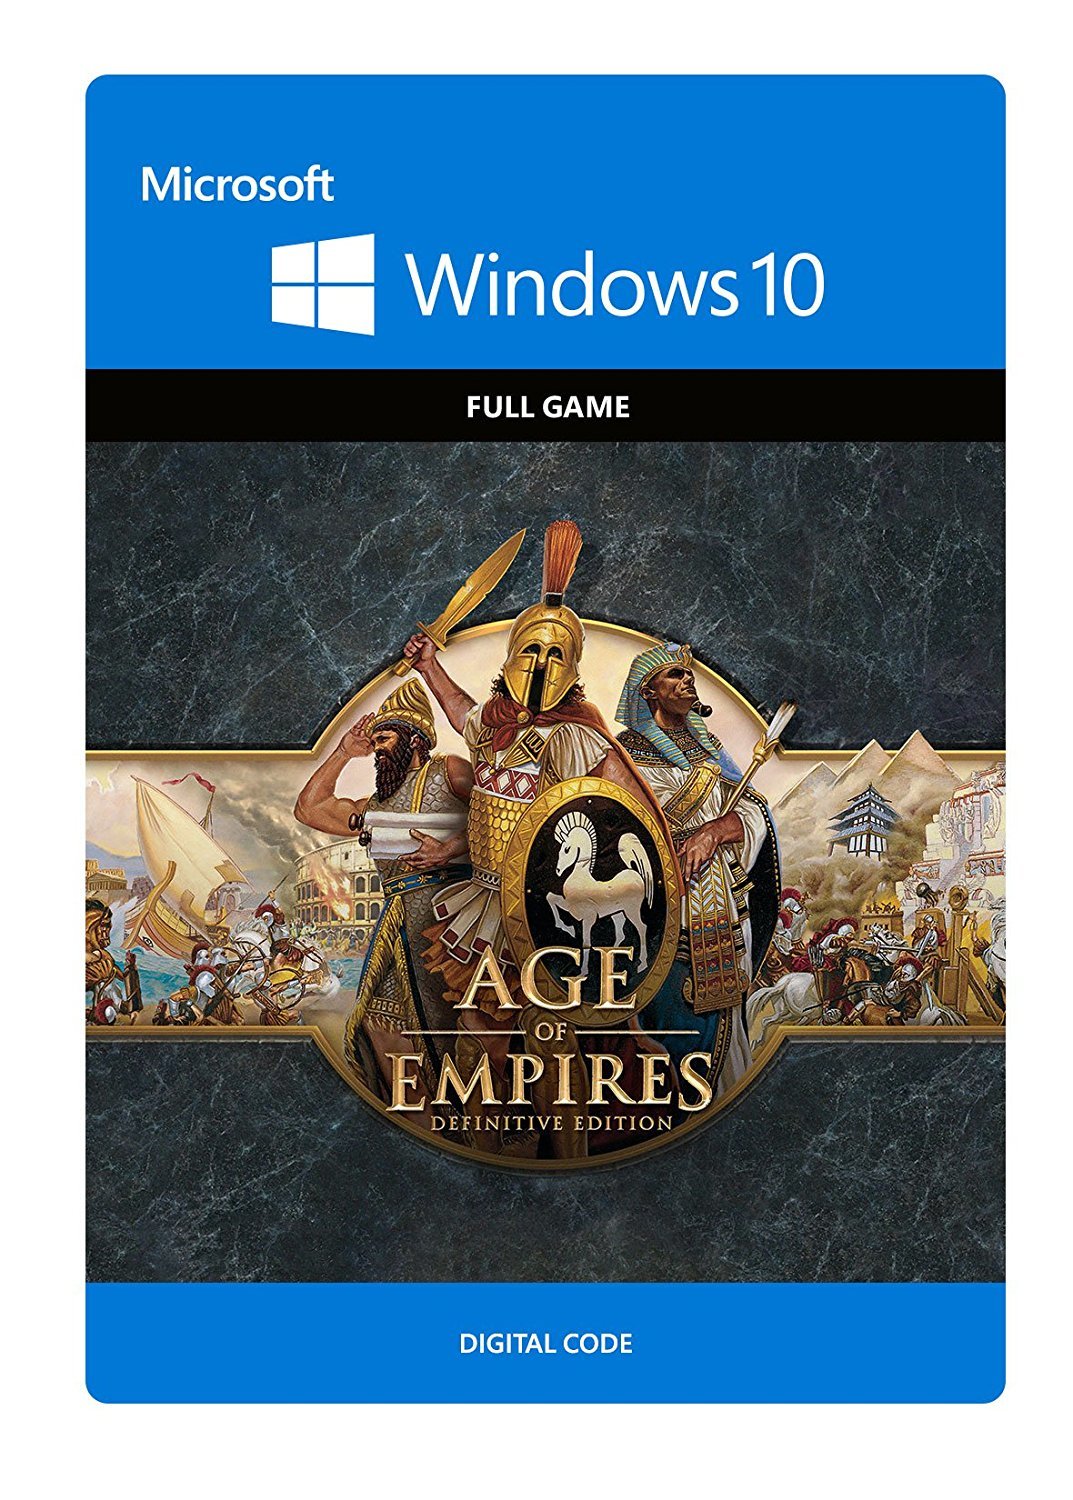 age of empires 2 definitive edition key